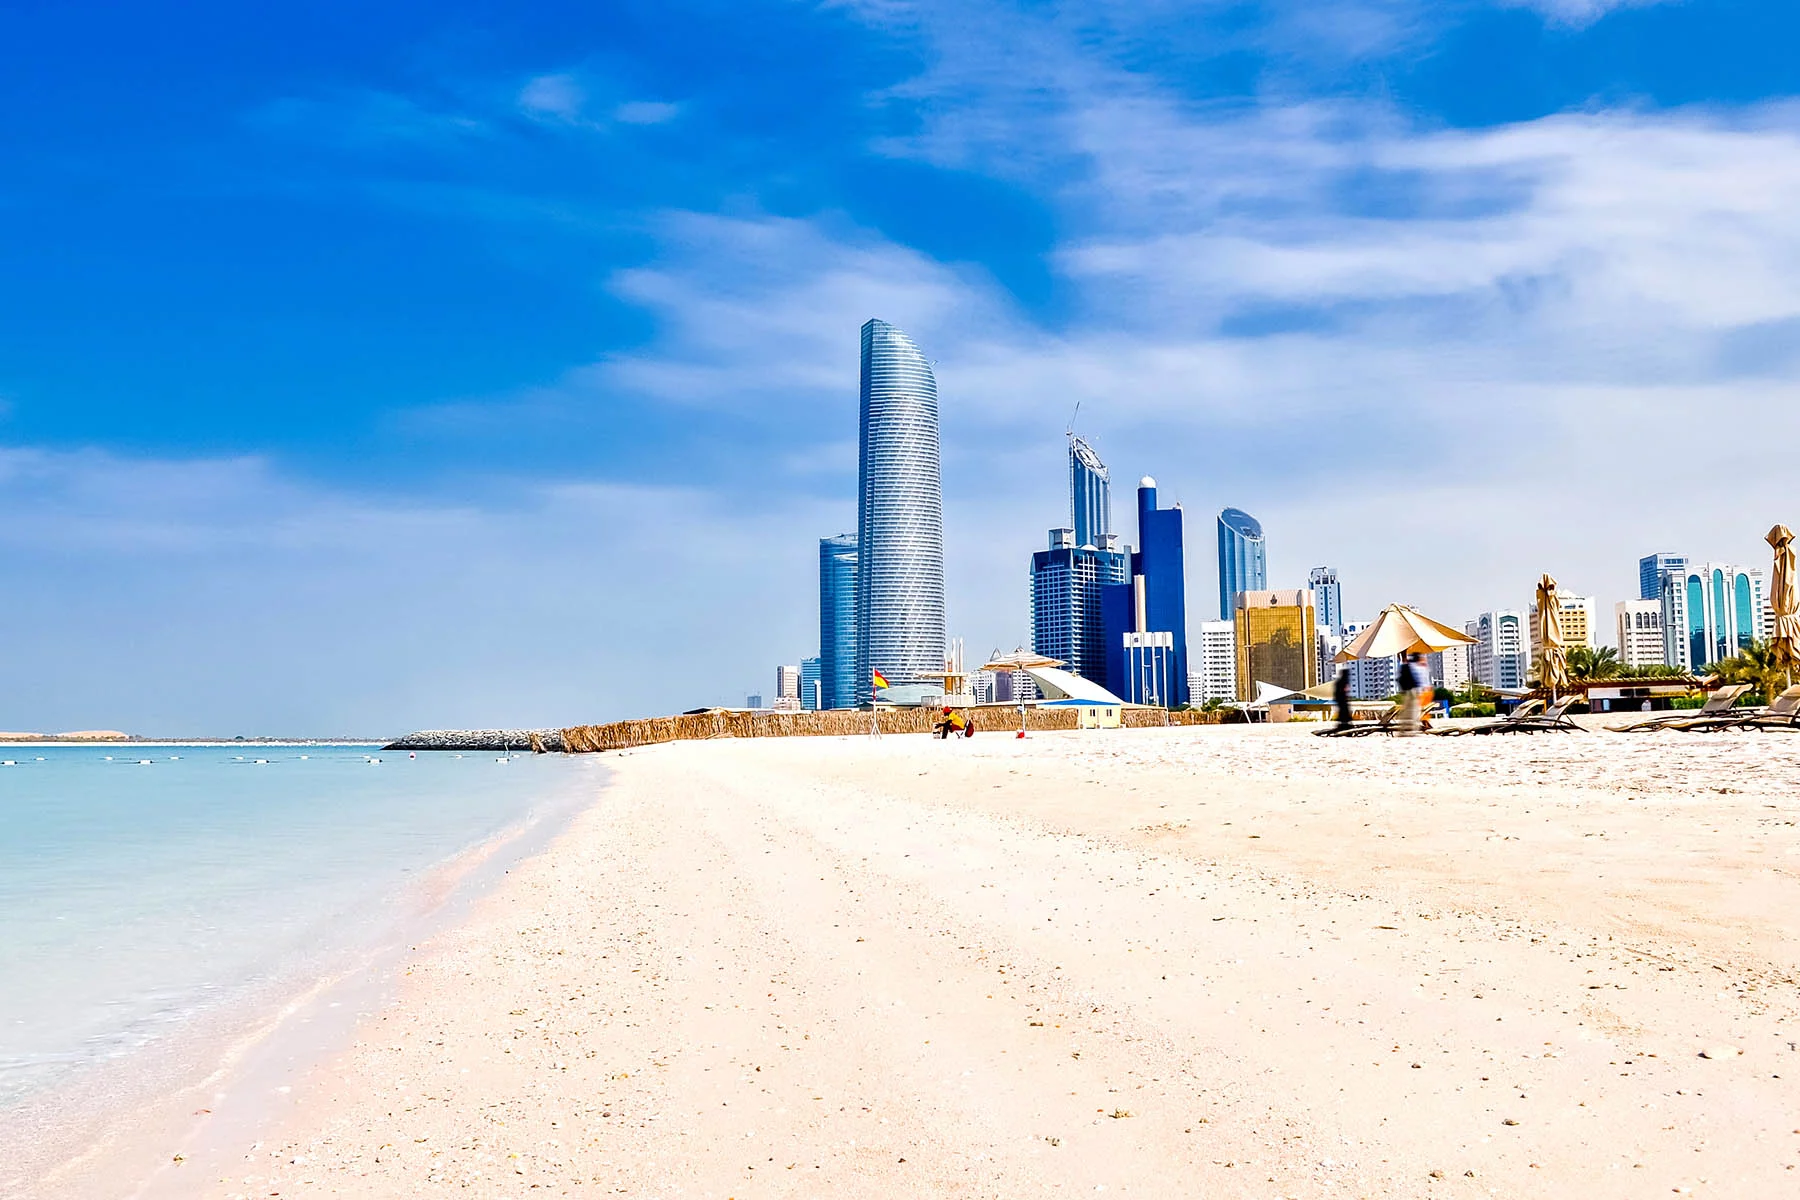 Our tour car dubai also offer beaches & waterfront tour to all the monuments mades recently on the shores of dubai